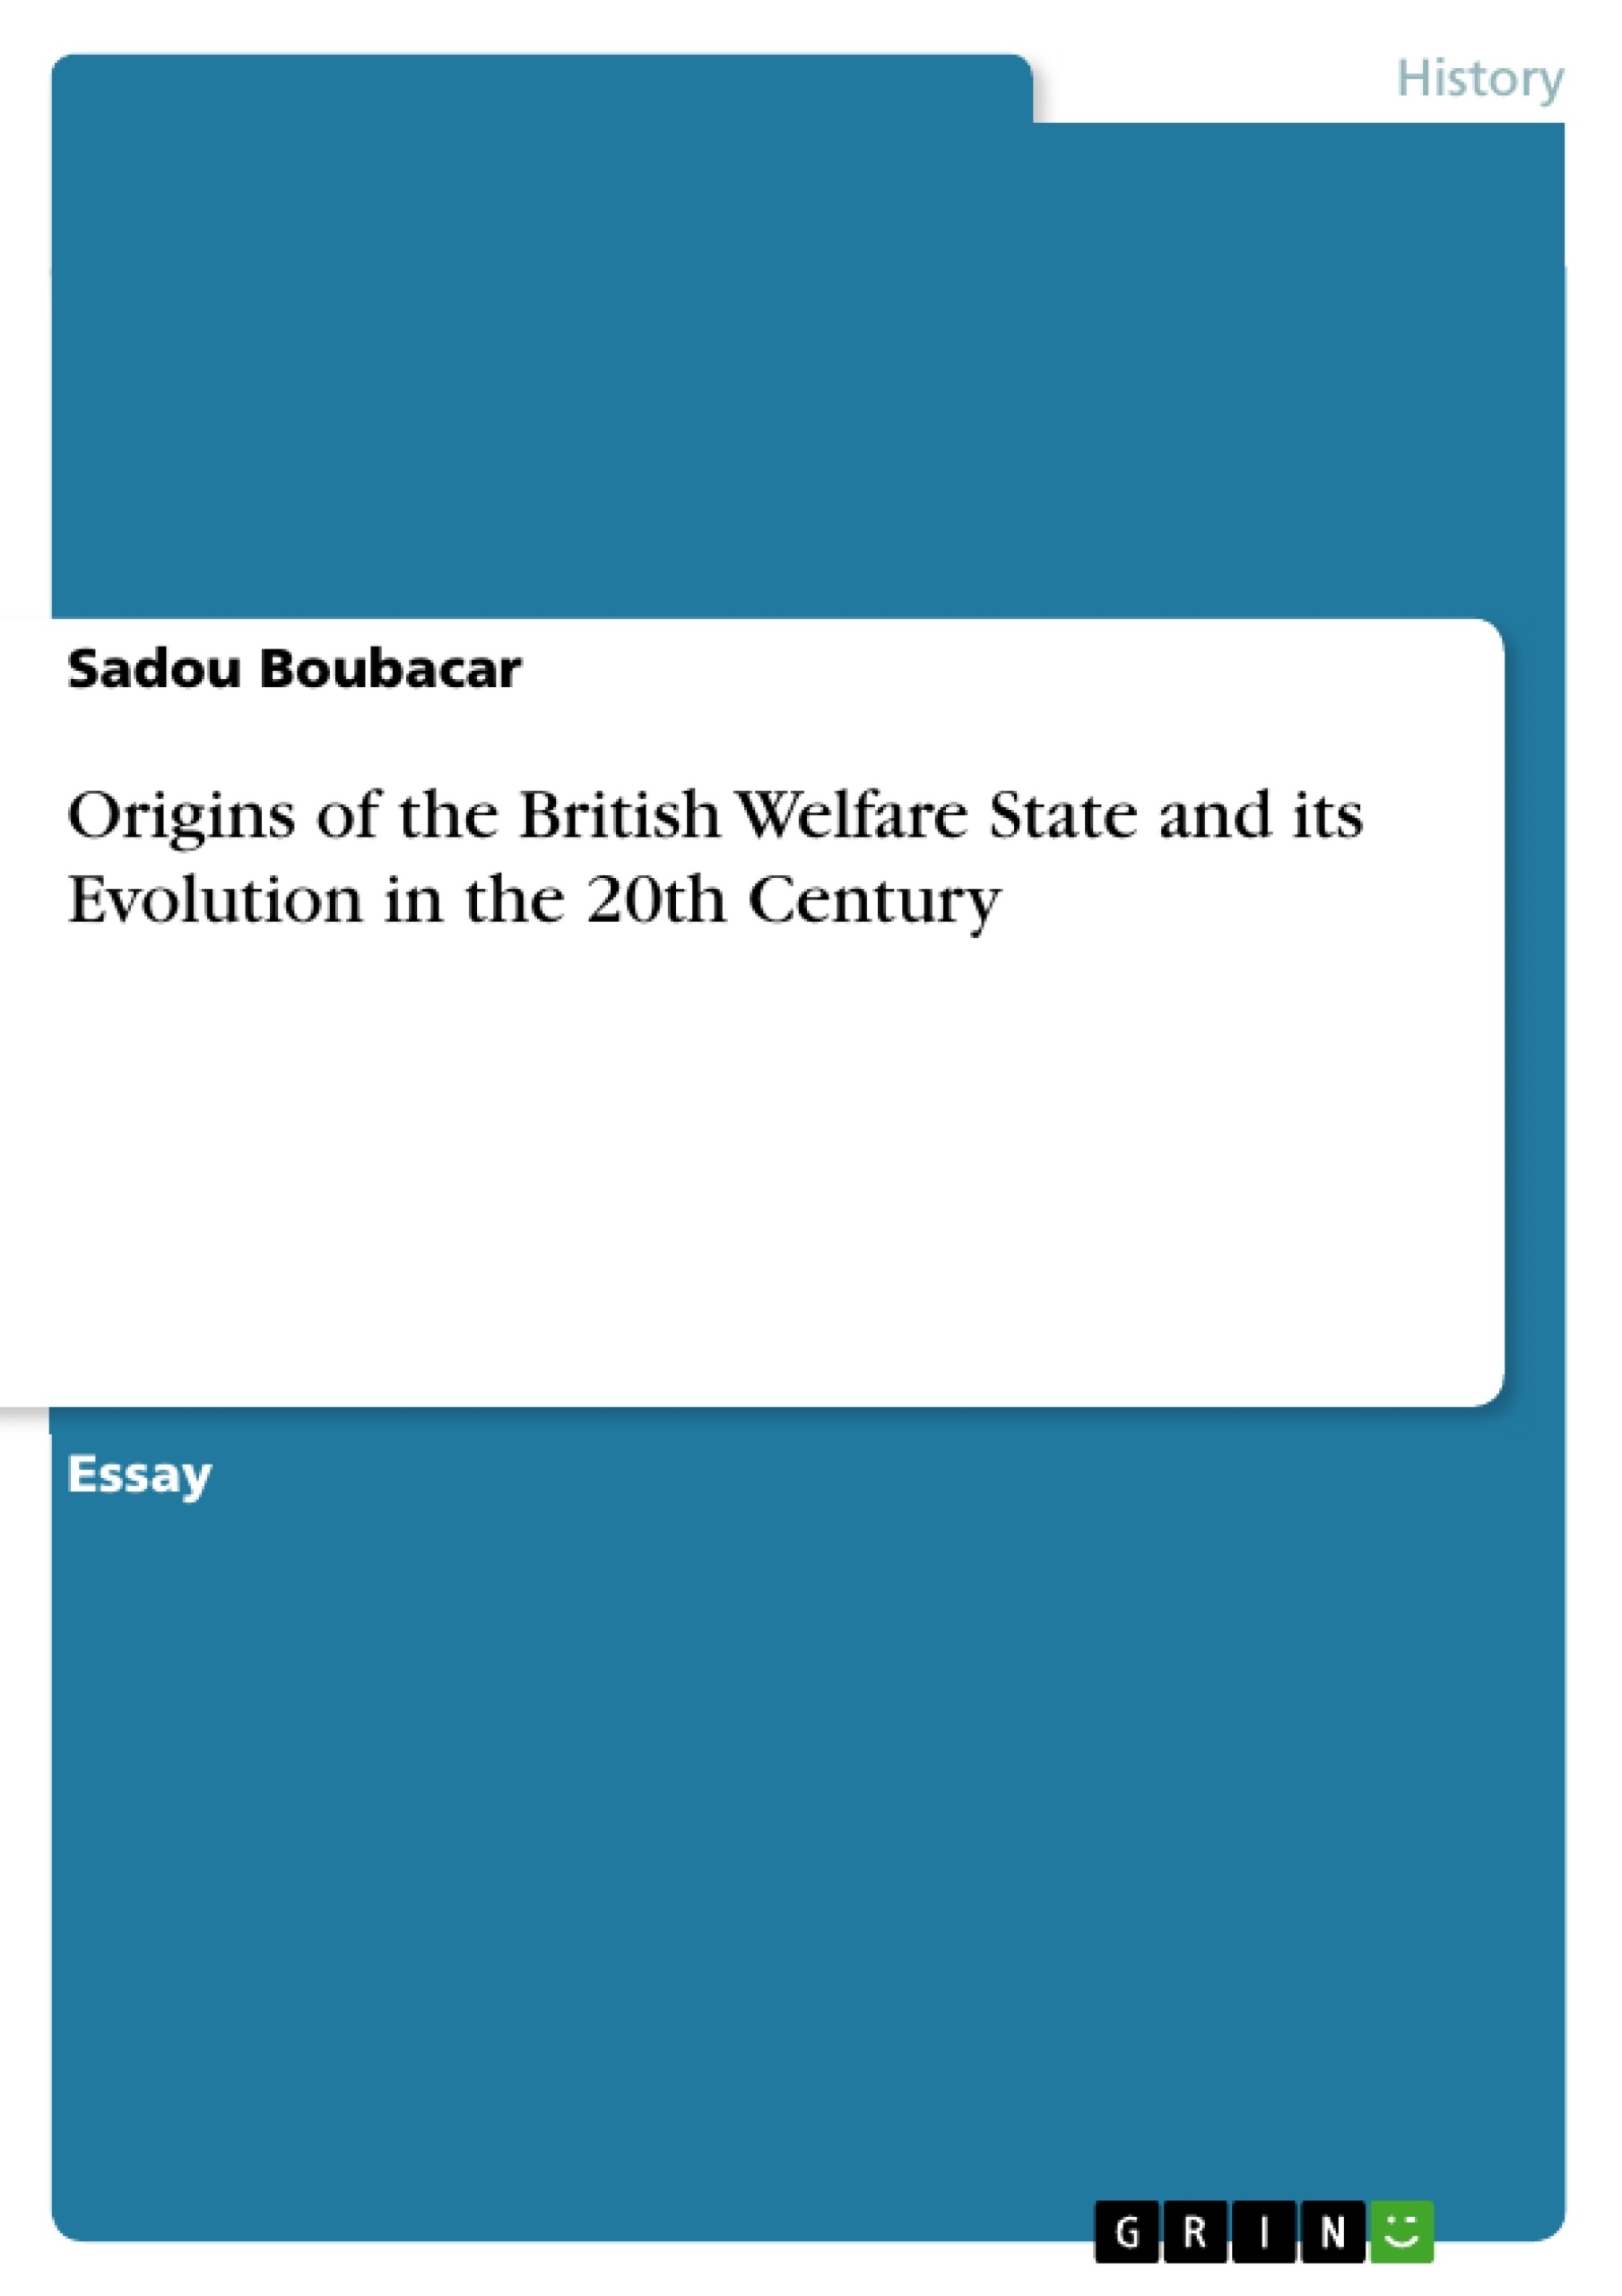 Title: Origins of the British Welfare State and its Evolution in the 20th Century